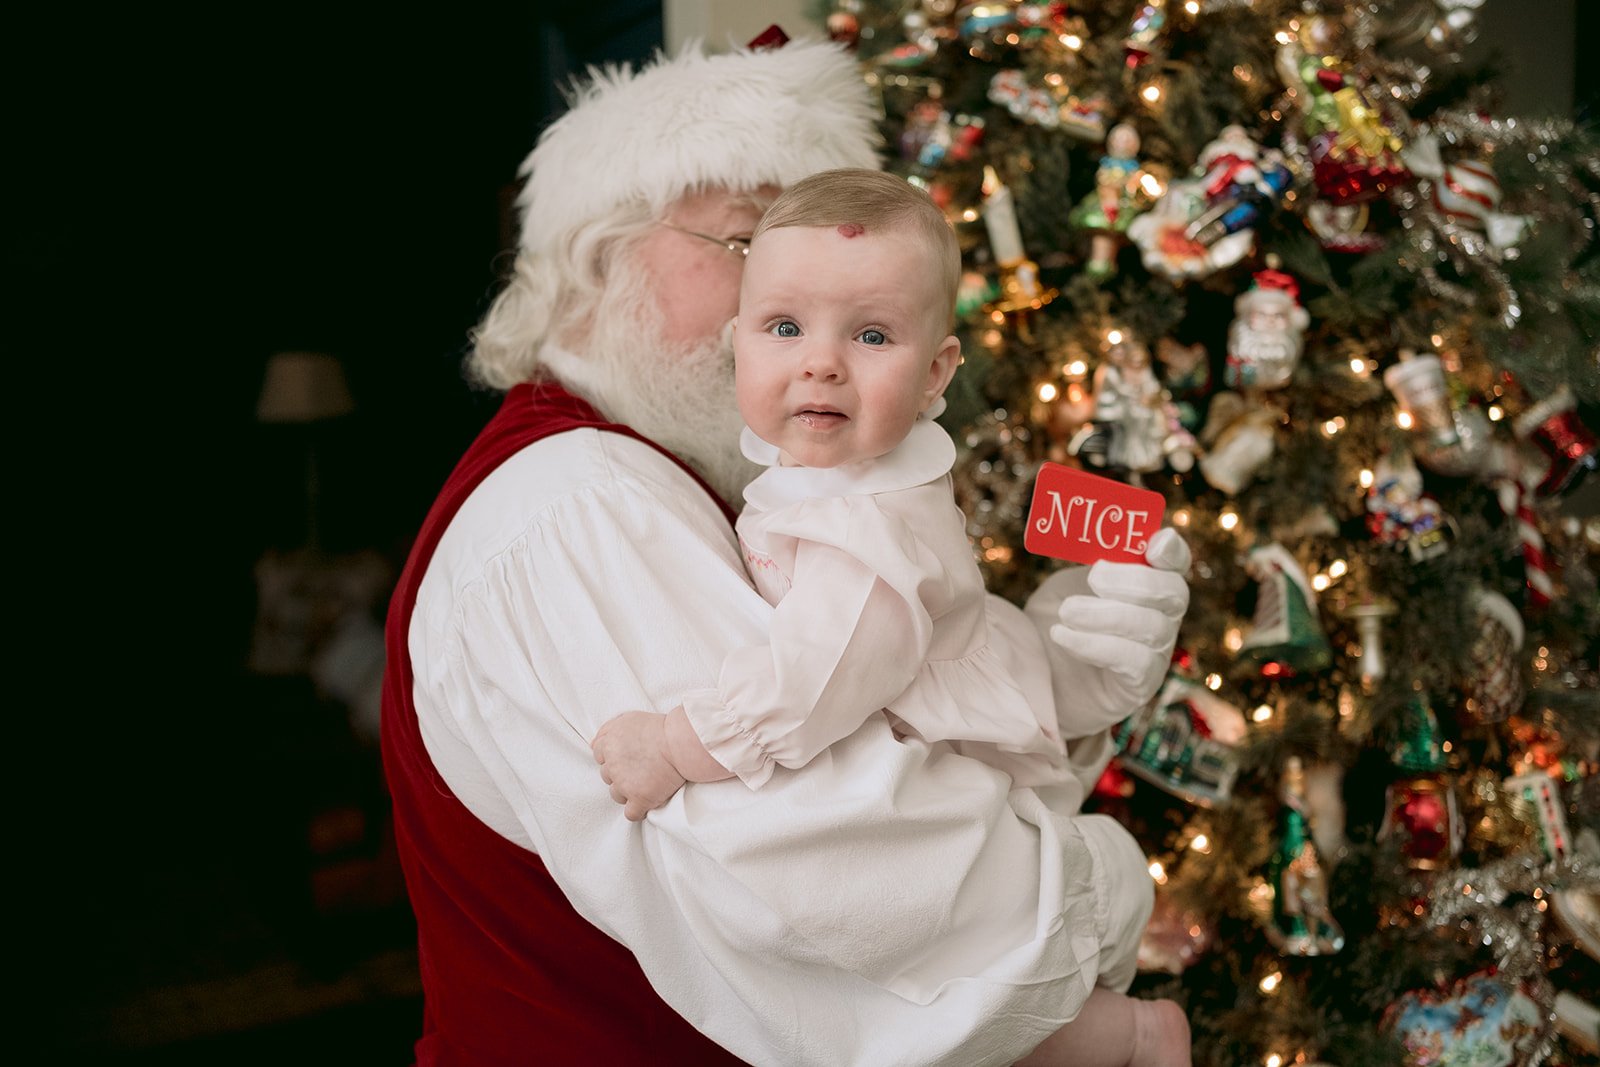 Santa holds young baby girl in from of the Christmas tree.